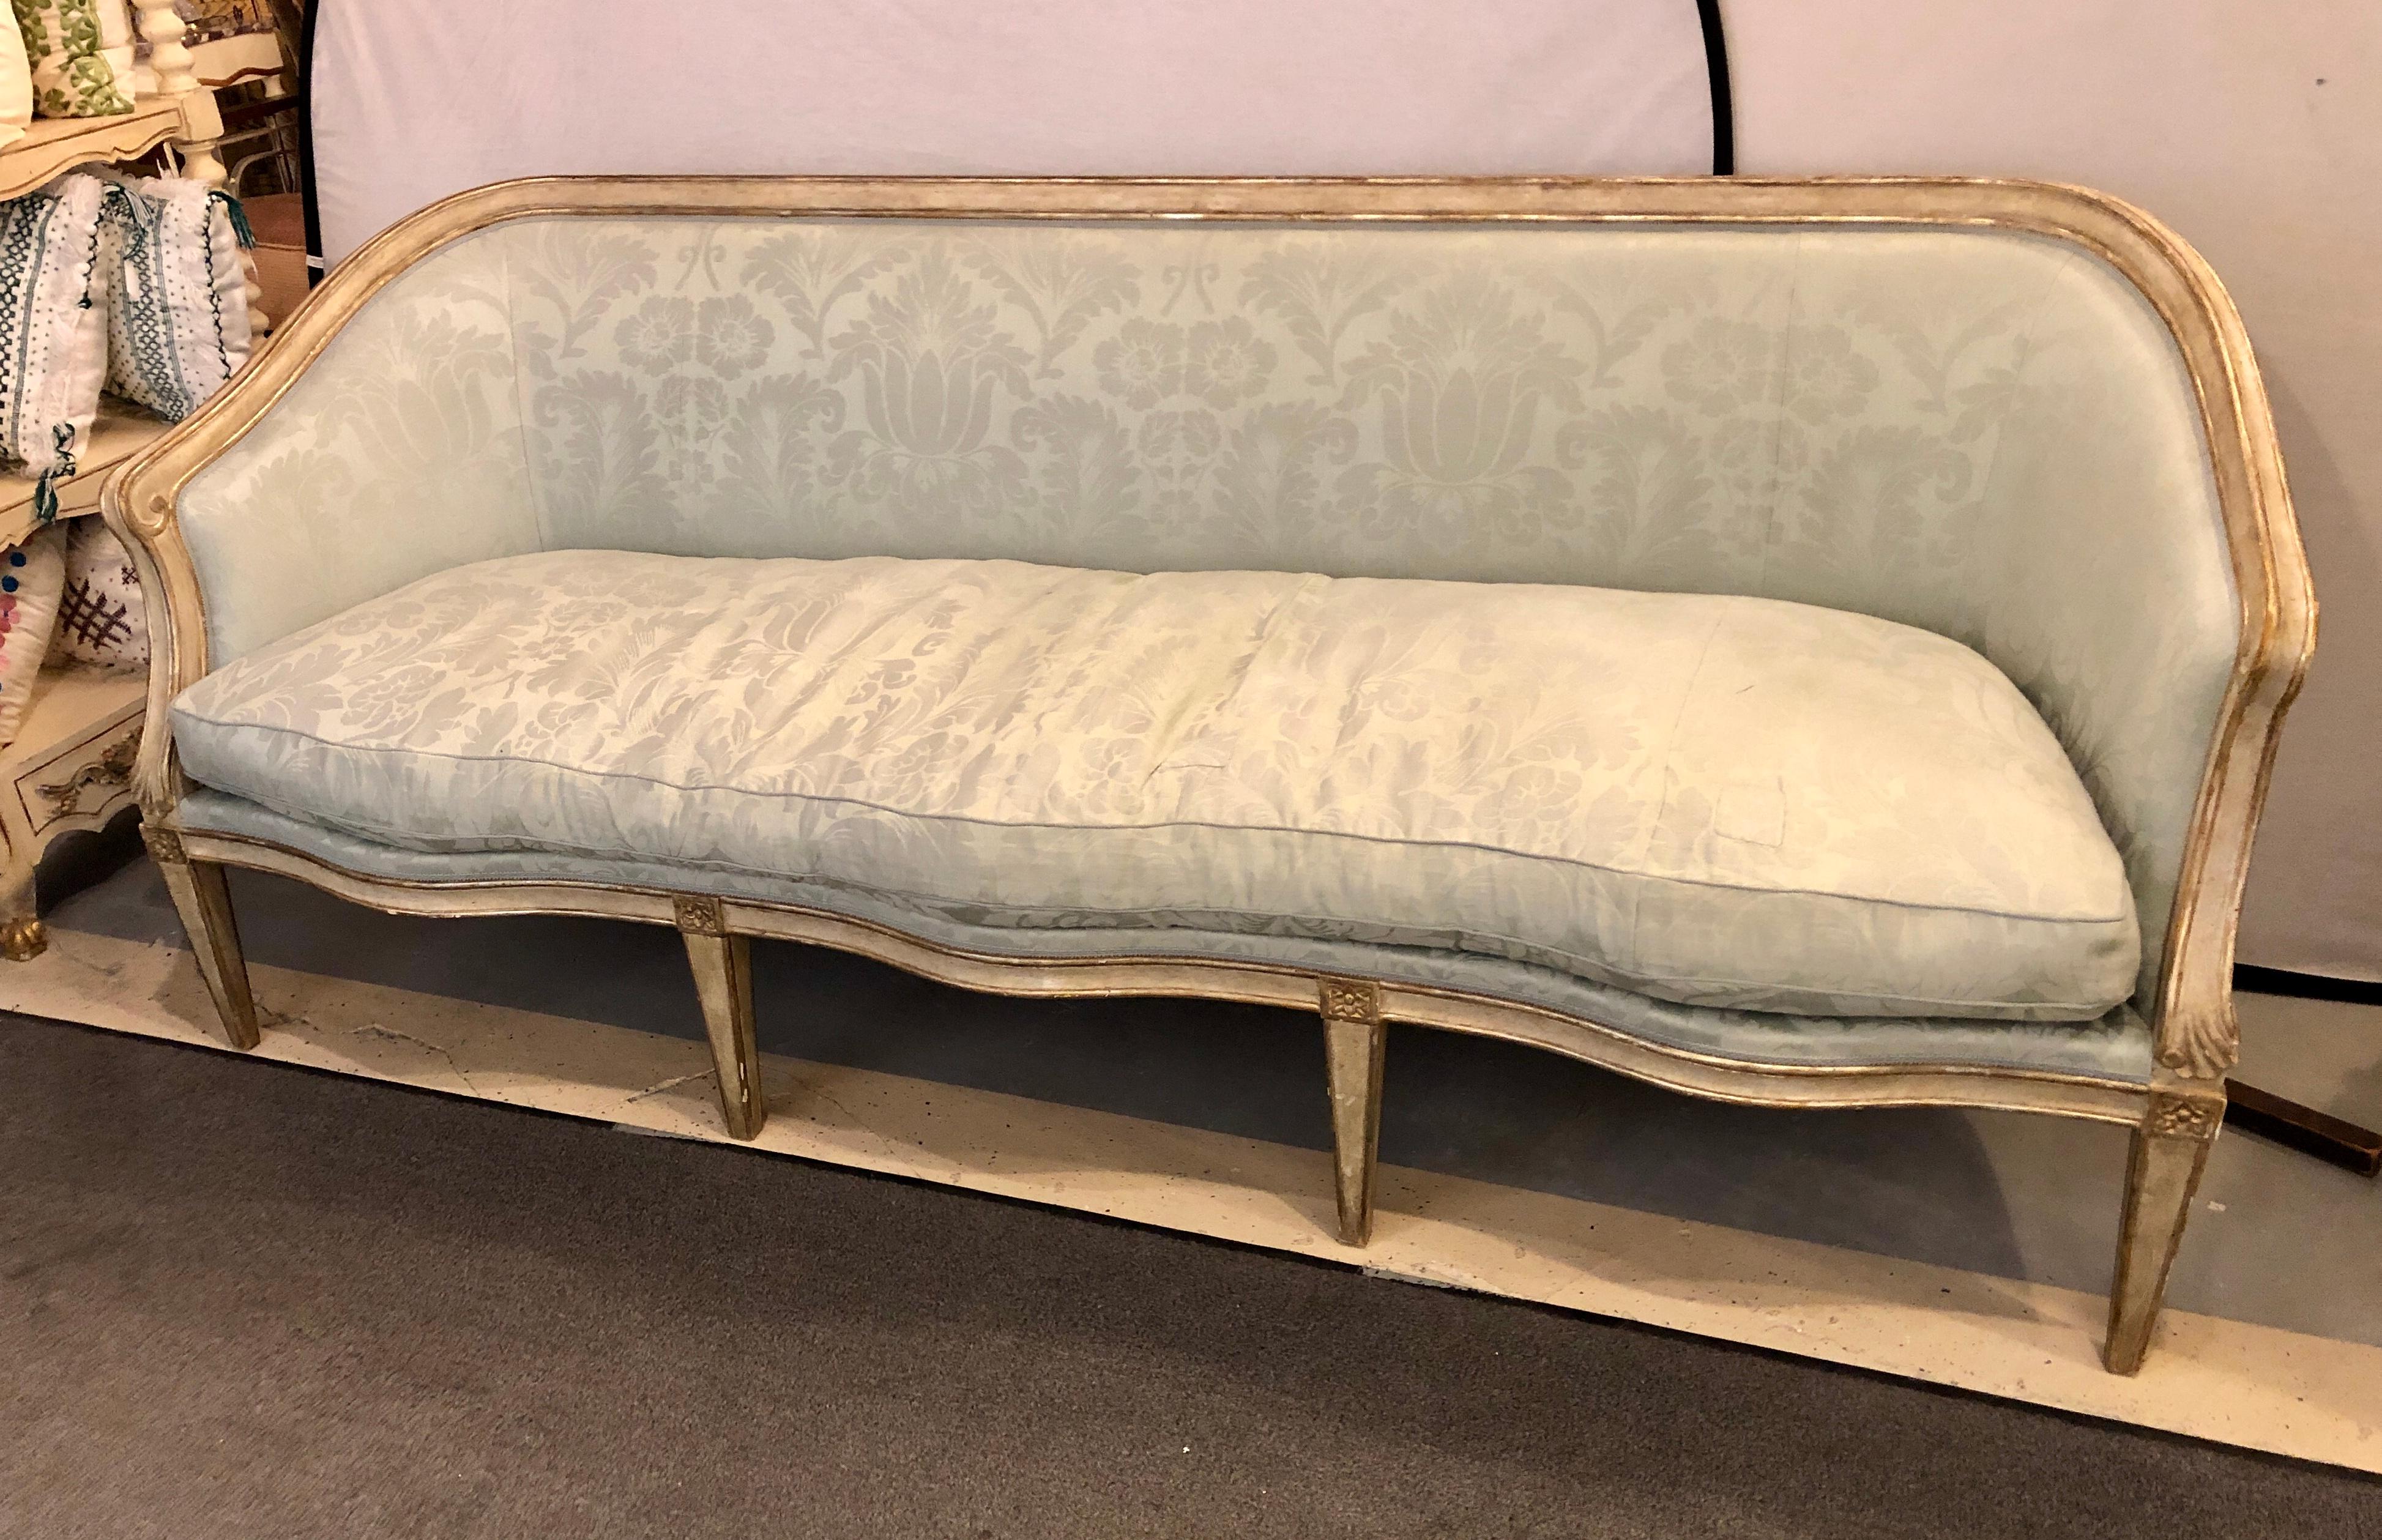 A late 19th century Swedish gilt and parcel paint decorated sofa. The frame in a nice damask upholstery that has a few blemishes and tears. The frame in fine sturdy strong condition. Fresh out of a Park Avenue apartment.